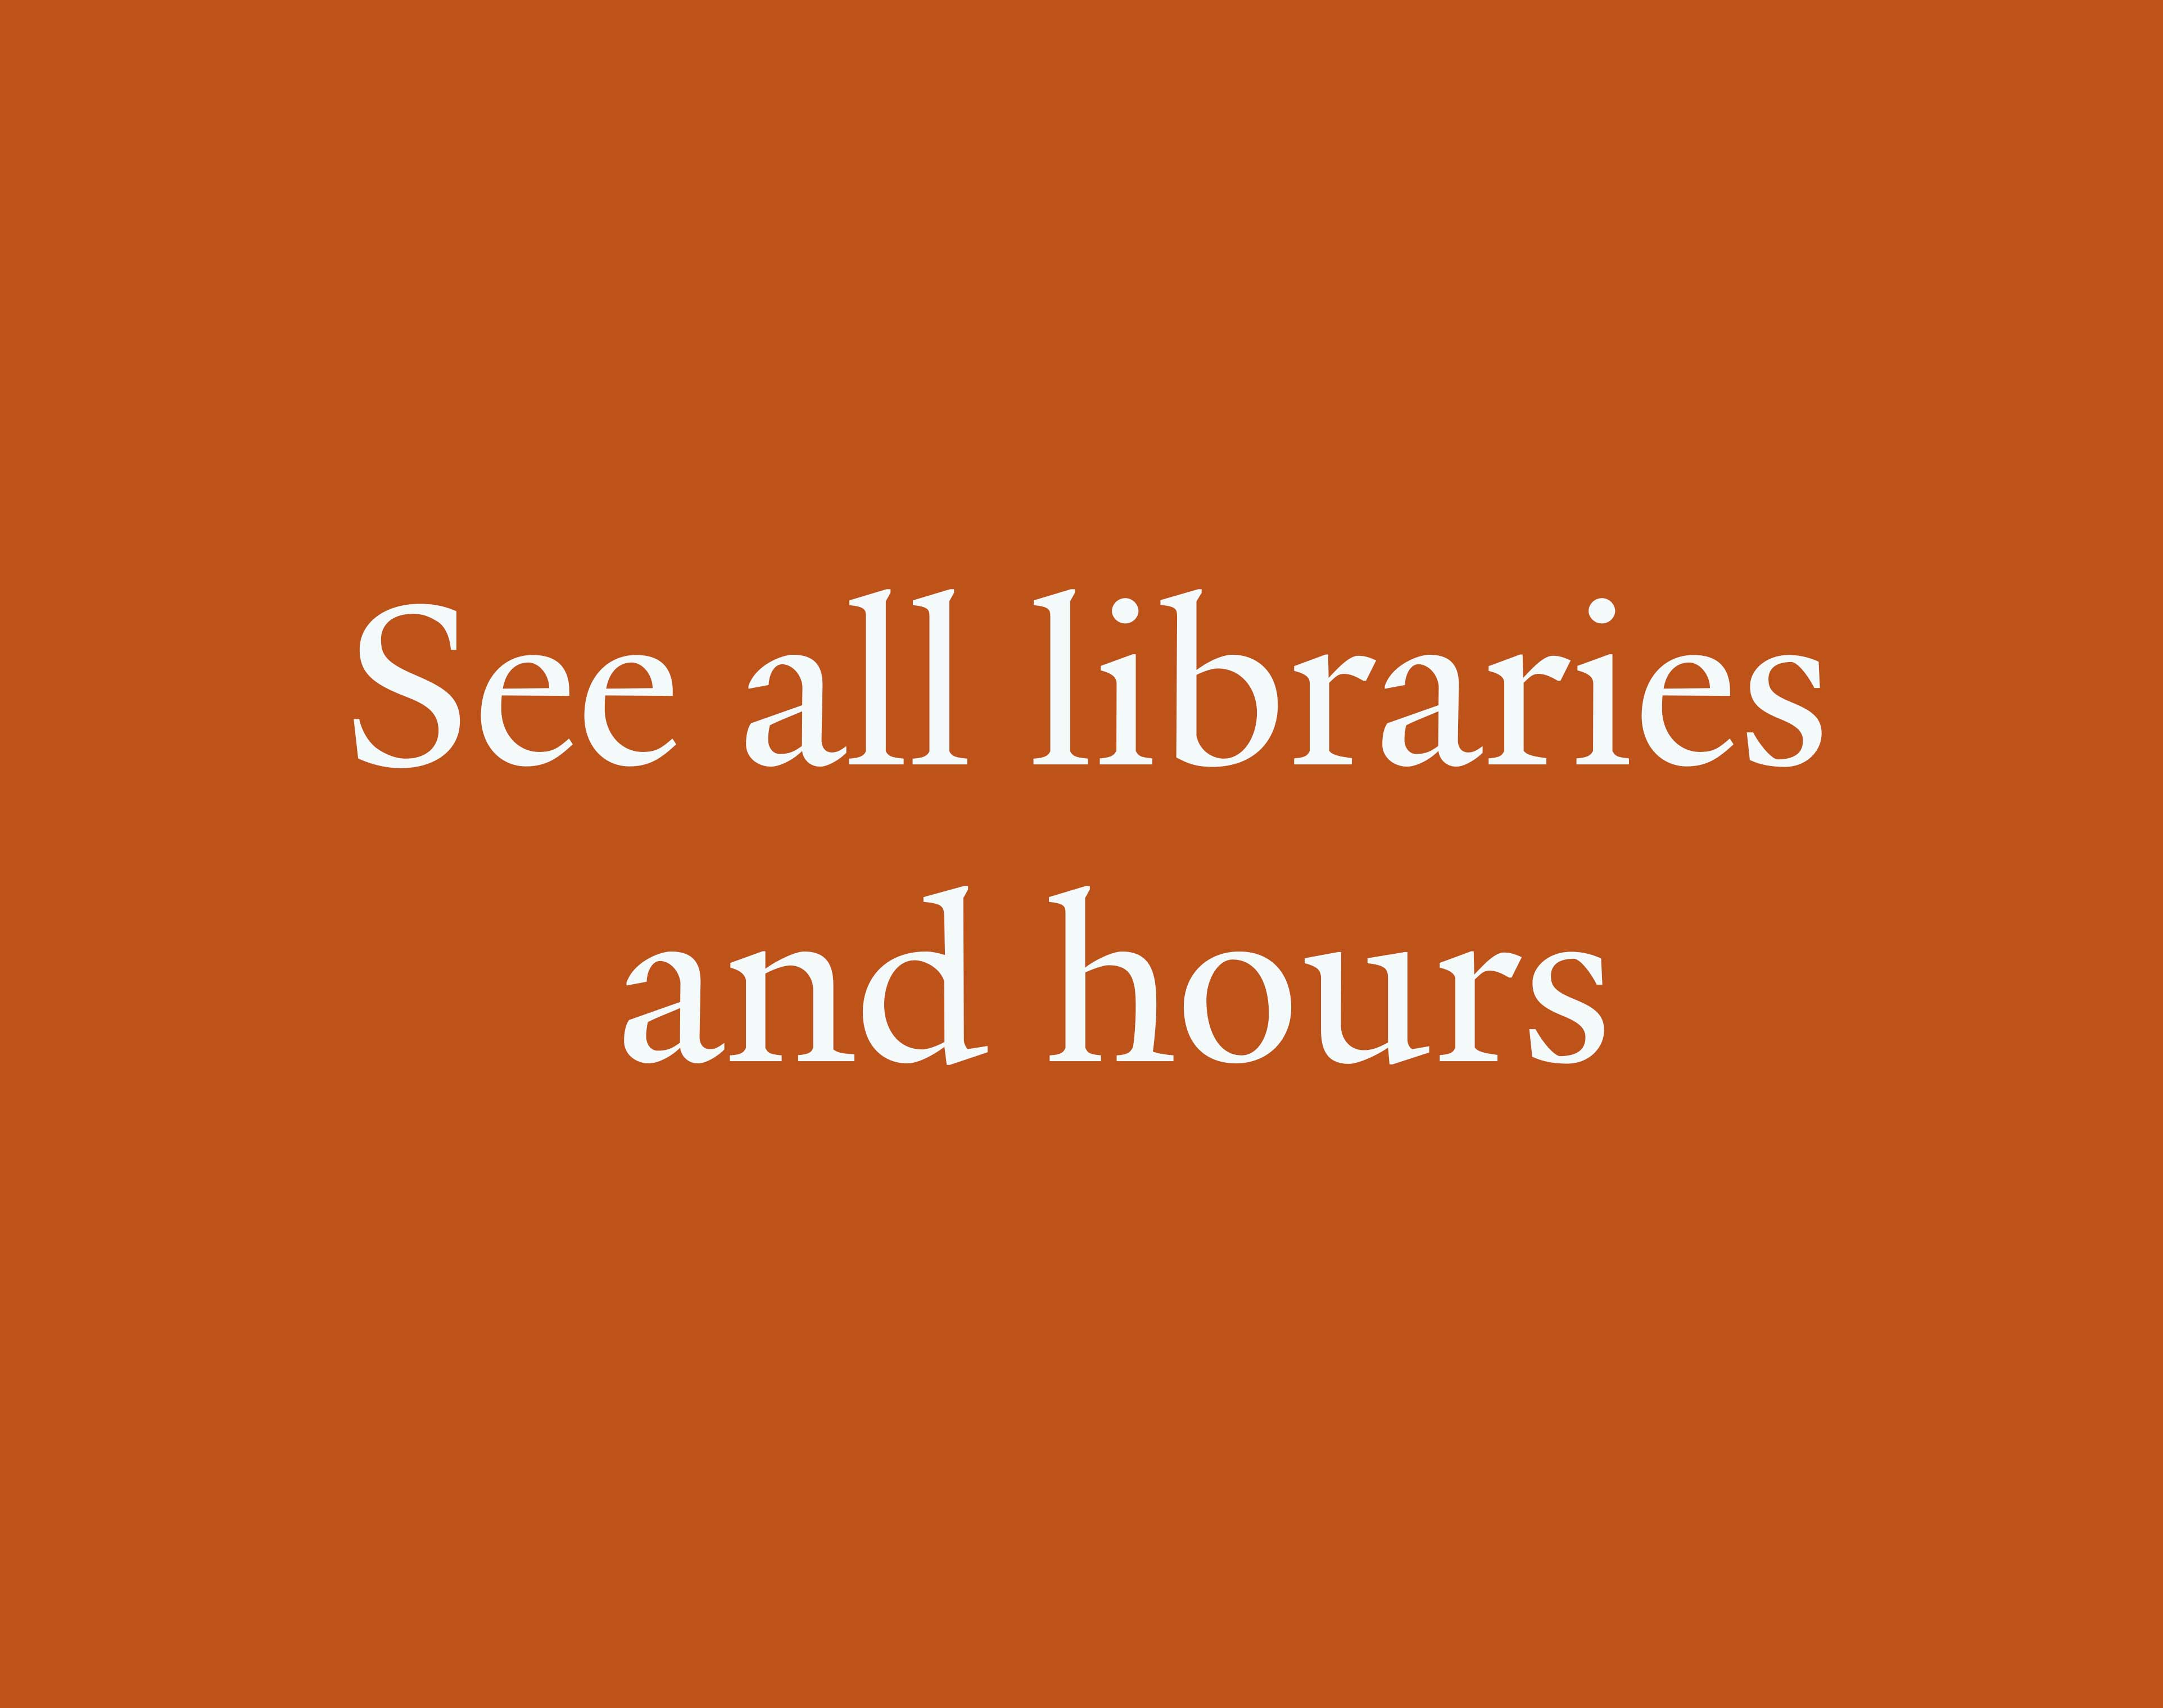 Image with text: See all libraries and hours, links to buildings and hours page